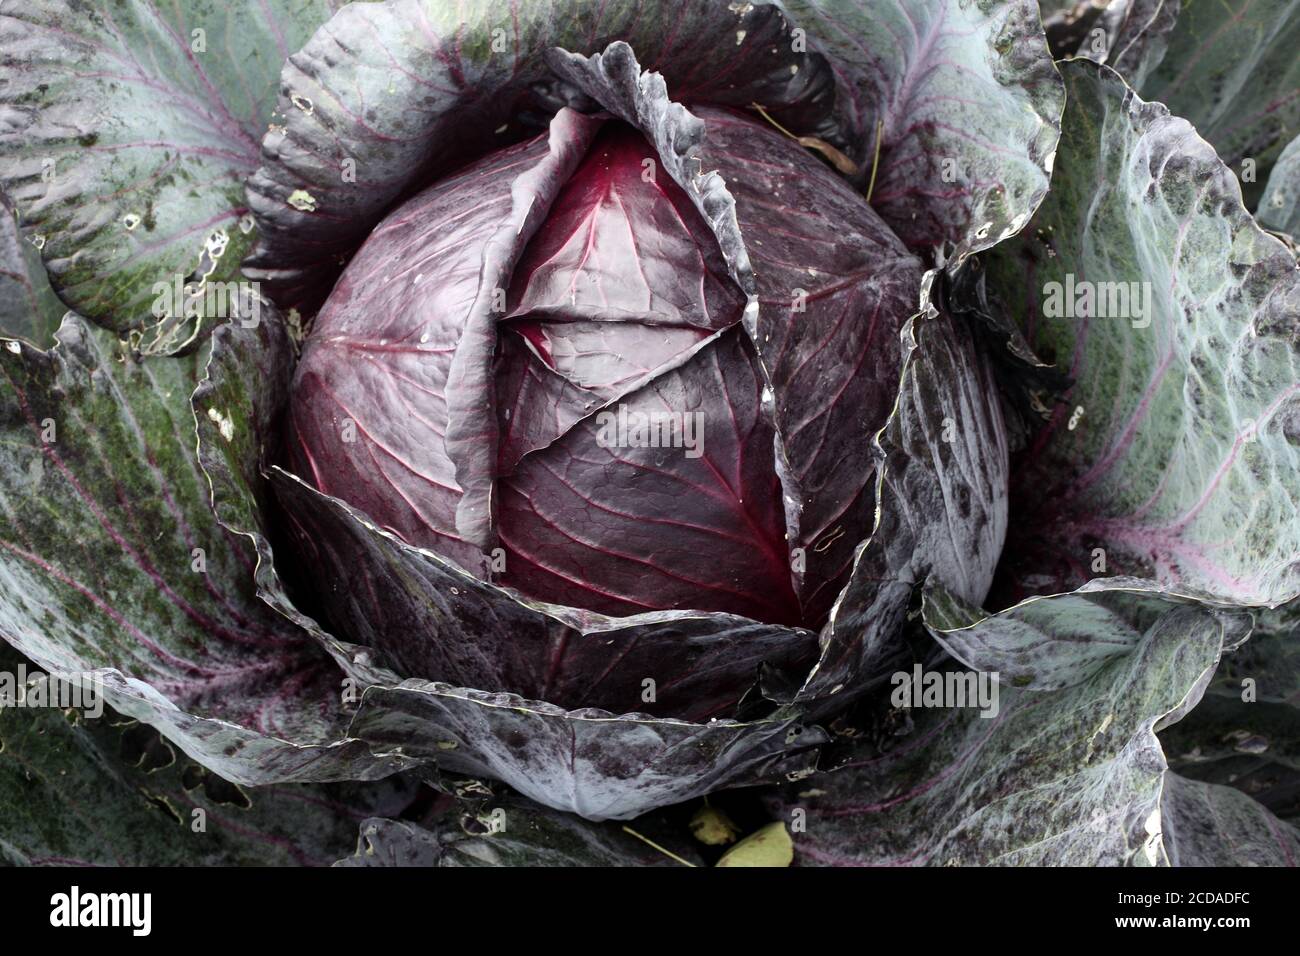 Red cabbage Brassica oleracea 'Redruth' background like kale vegetable grown for its fresh nutition food health benefits stock photo image Stock Photo